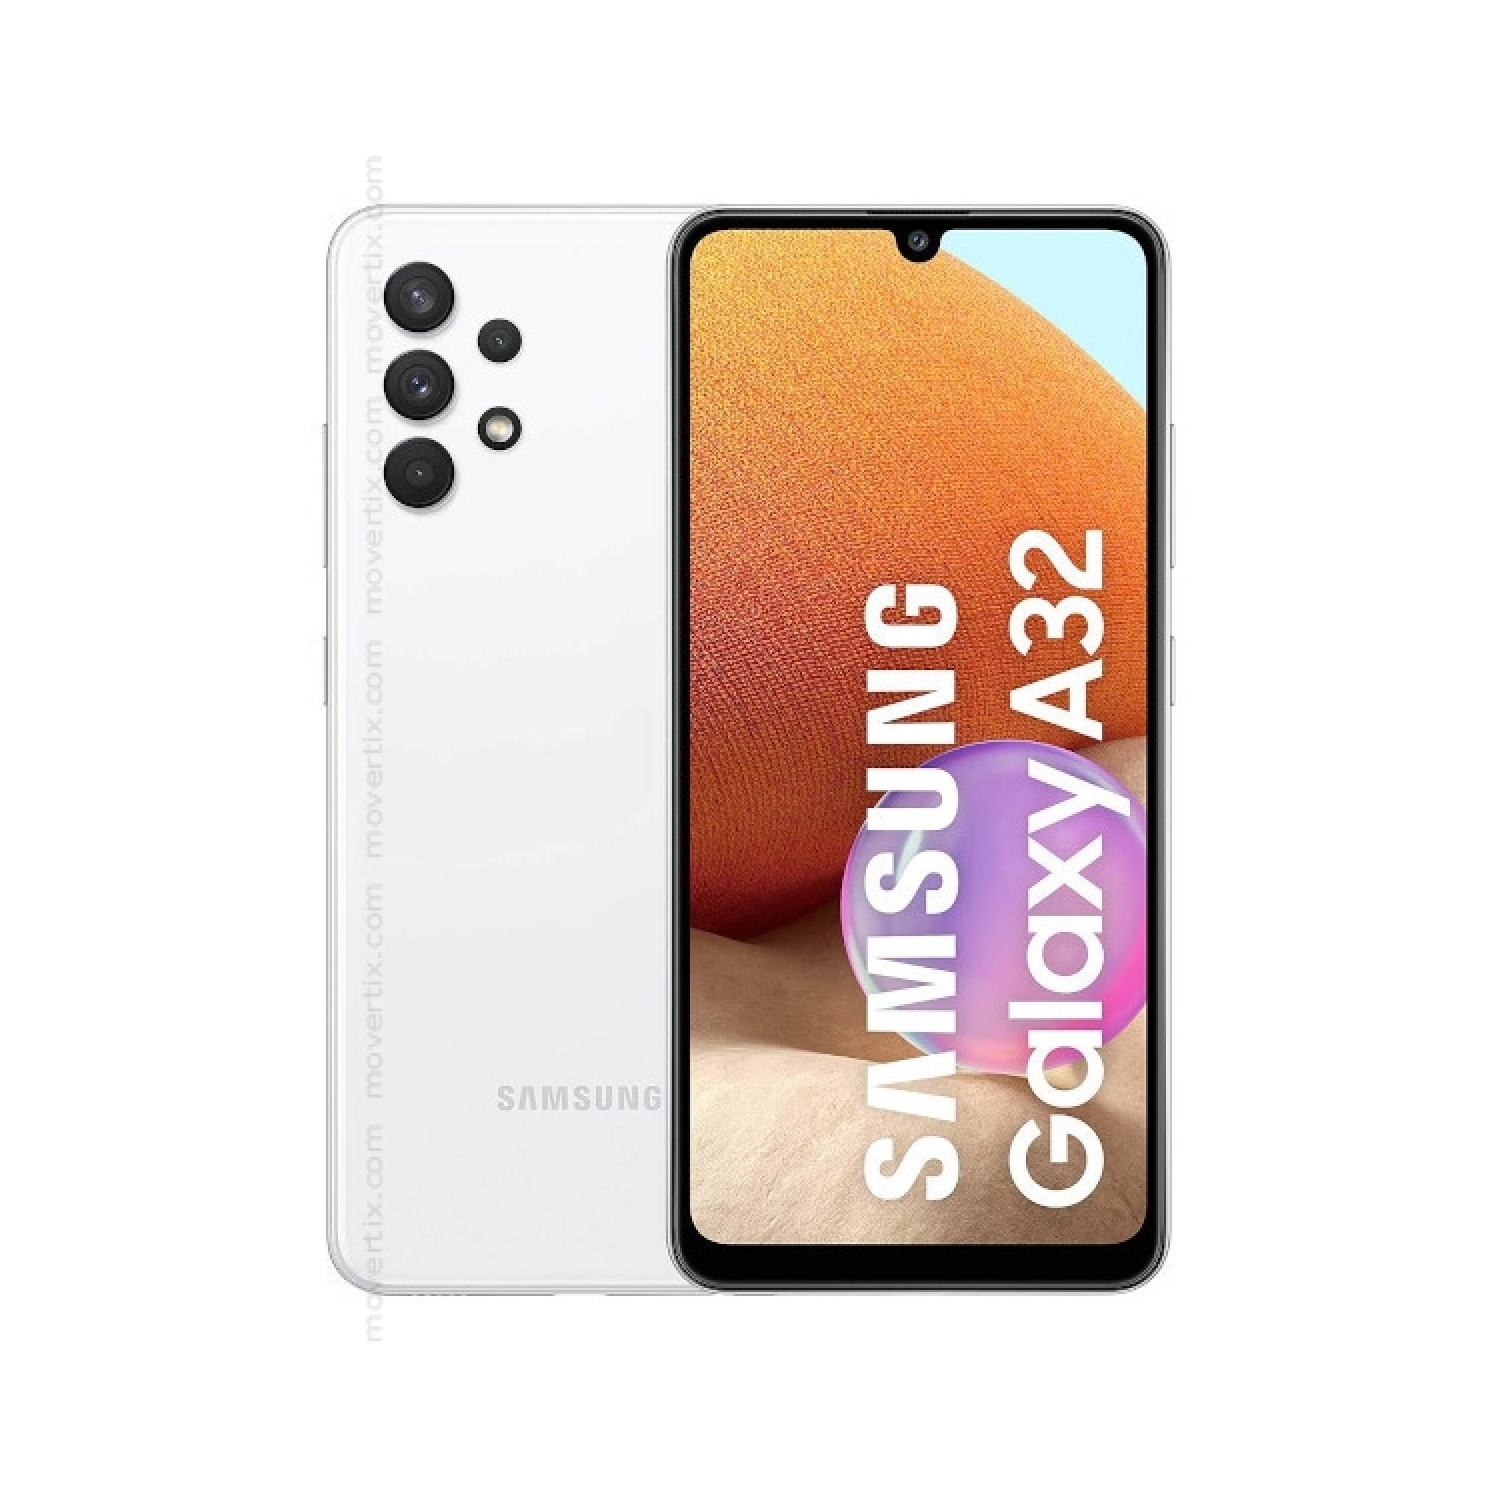 Samsung - Galaxy A32 - 4G - A325M/DS - Dual SIM - 6.4'' Super AMOLED - 128GB/4GB - Factory Unlocked - Smartphone - Brand New - Awesome White